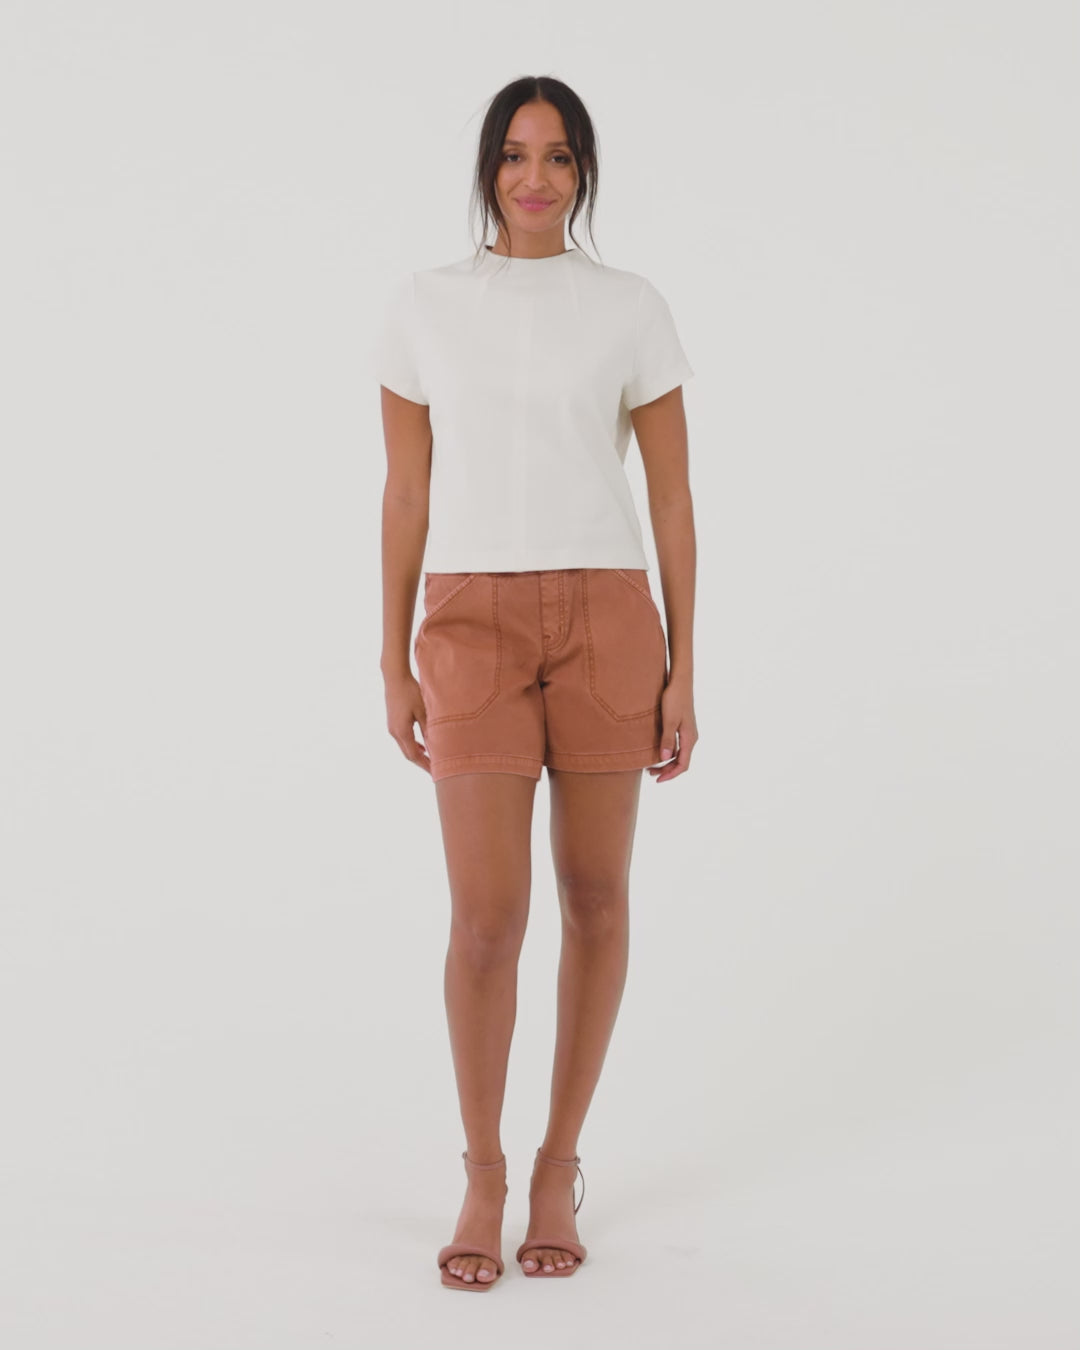 The Spanx Twill Shorts Are Just $55 Right Now